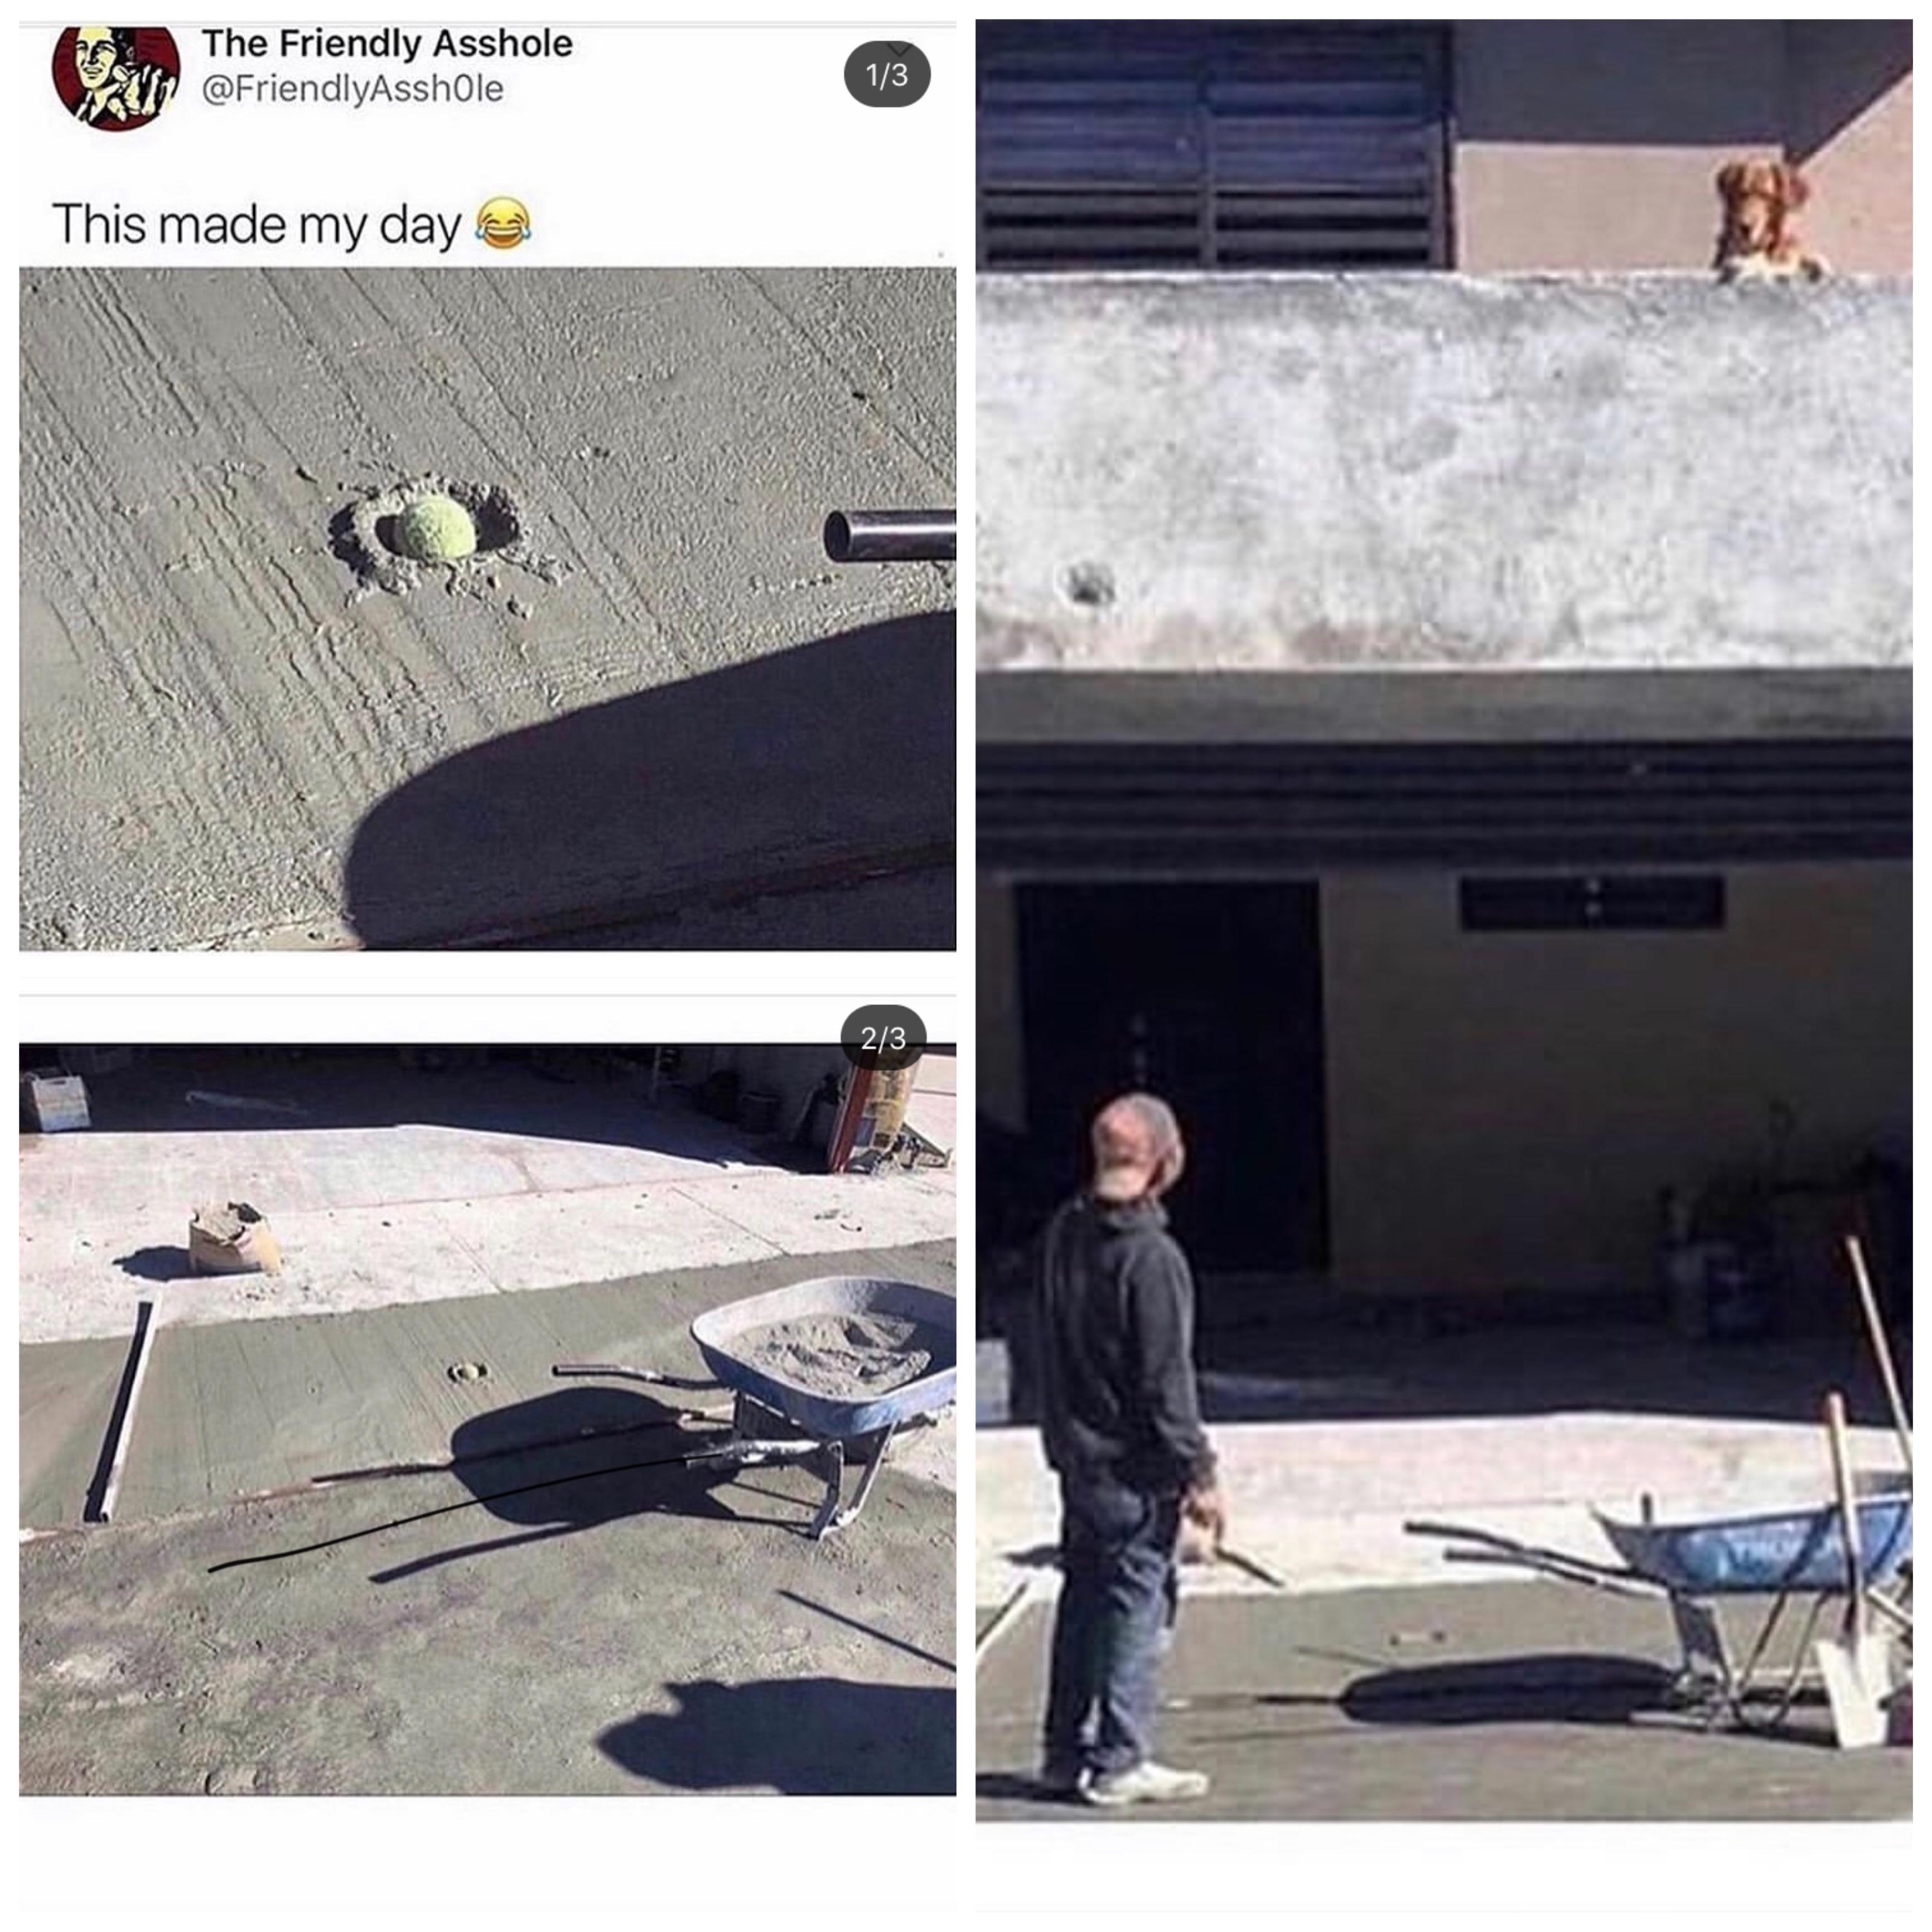 cool random pics and memes - roof - The Friendly Asshole This made my day 13 23